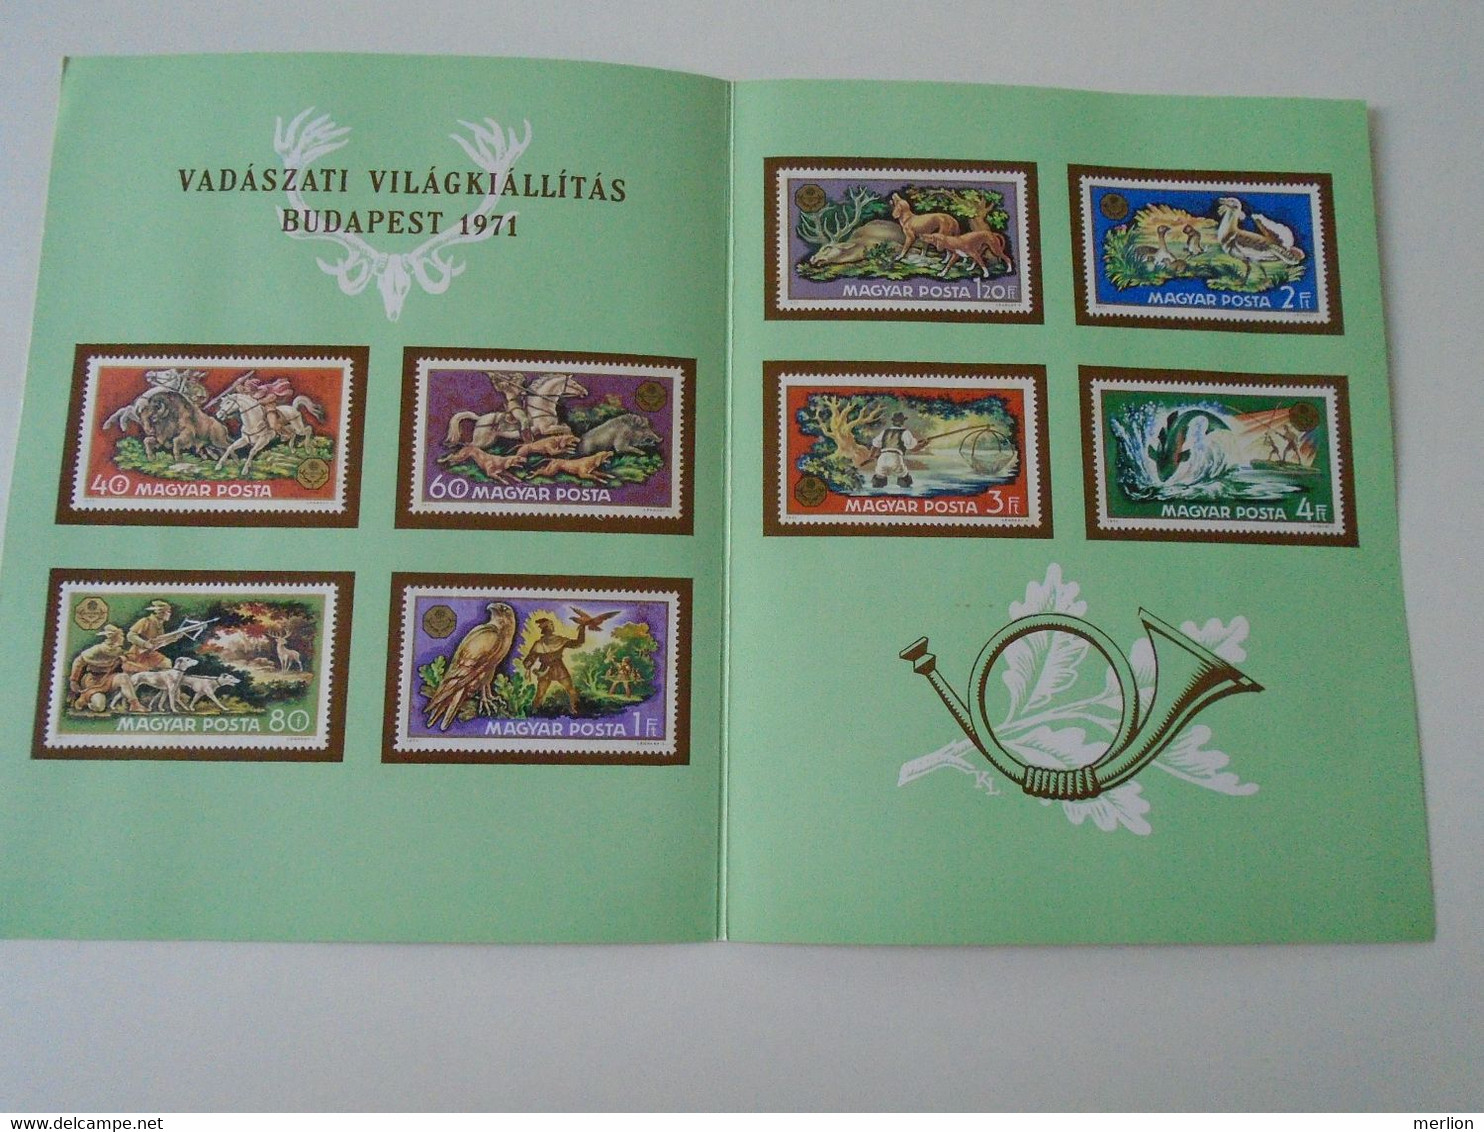 ZA374A001 Hungary  Jagd  Chasse  World Hunting Exhibition  1971  Budapest - Commemorative Sheets